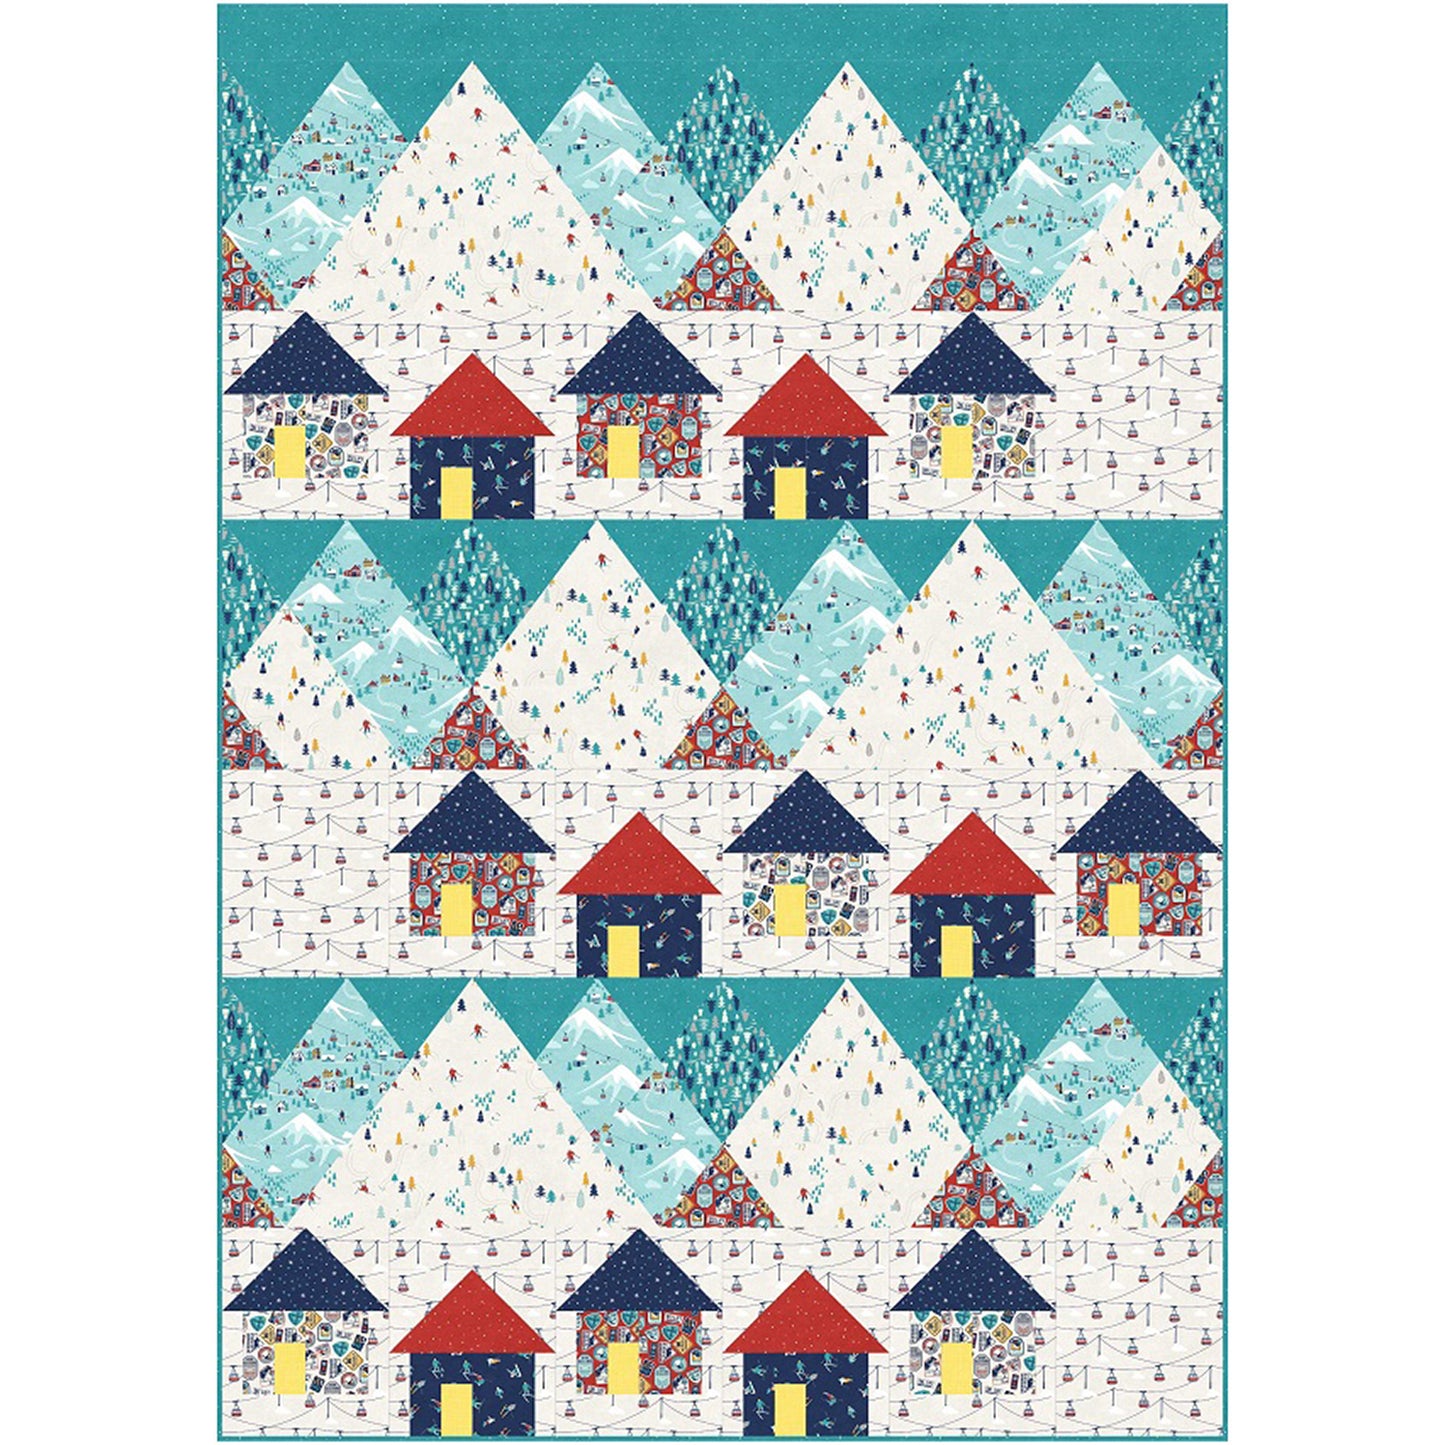 Quilted pattern featuring three rows of charming houses with a background of snowcovered mountains. Mountains in shades of blue, green, and white.